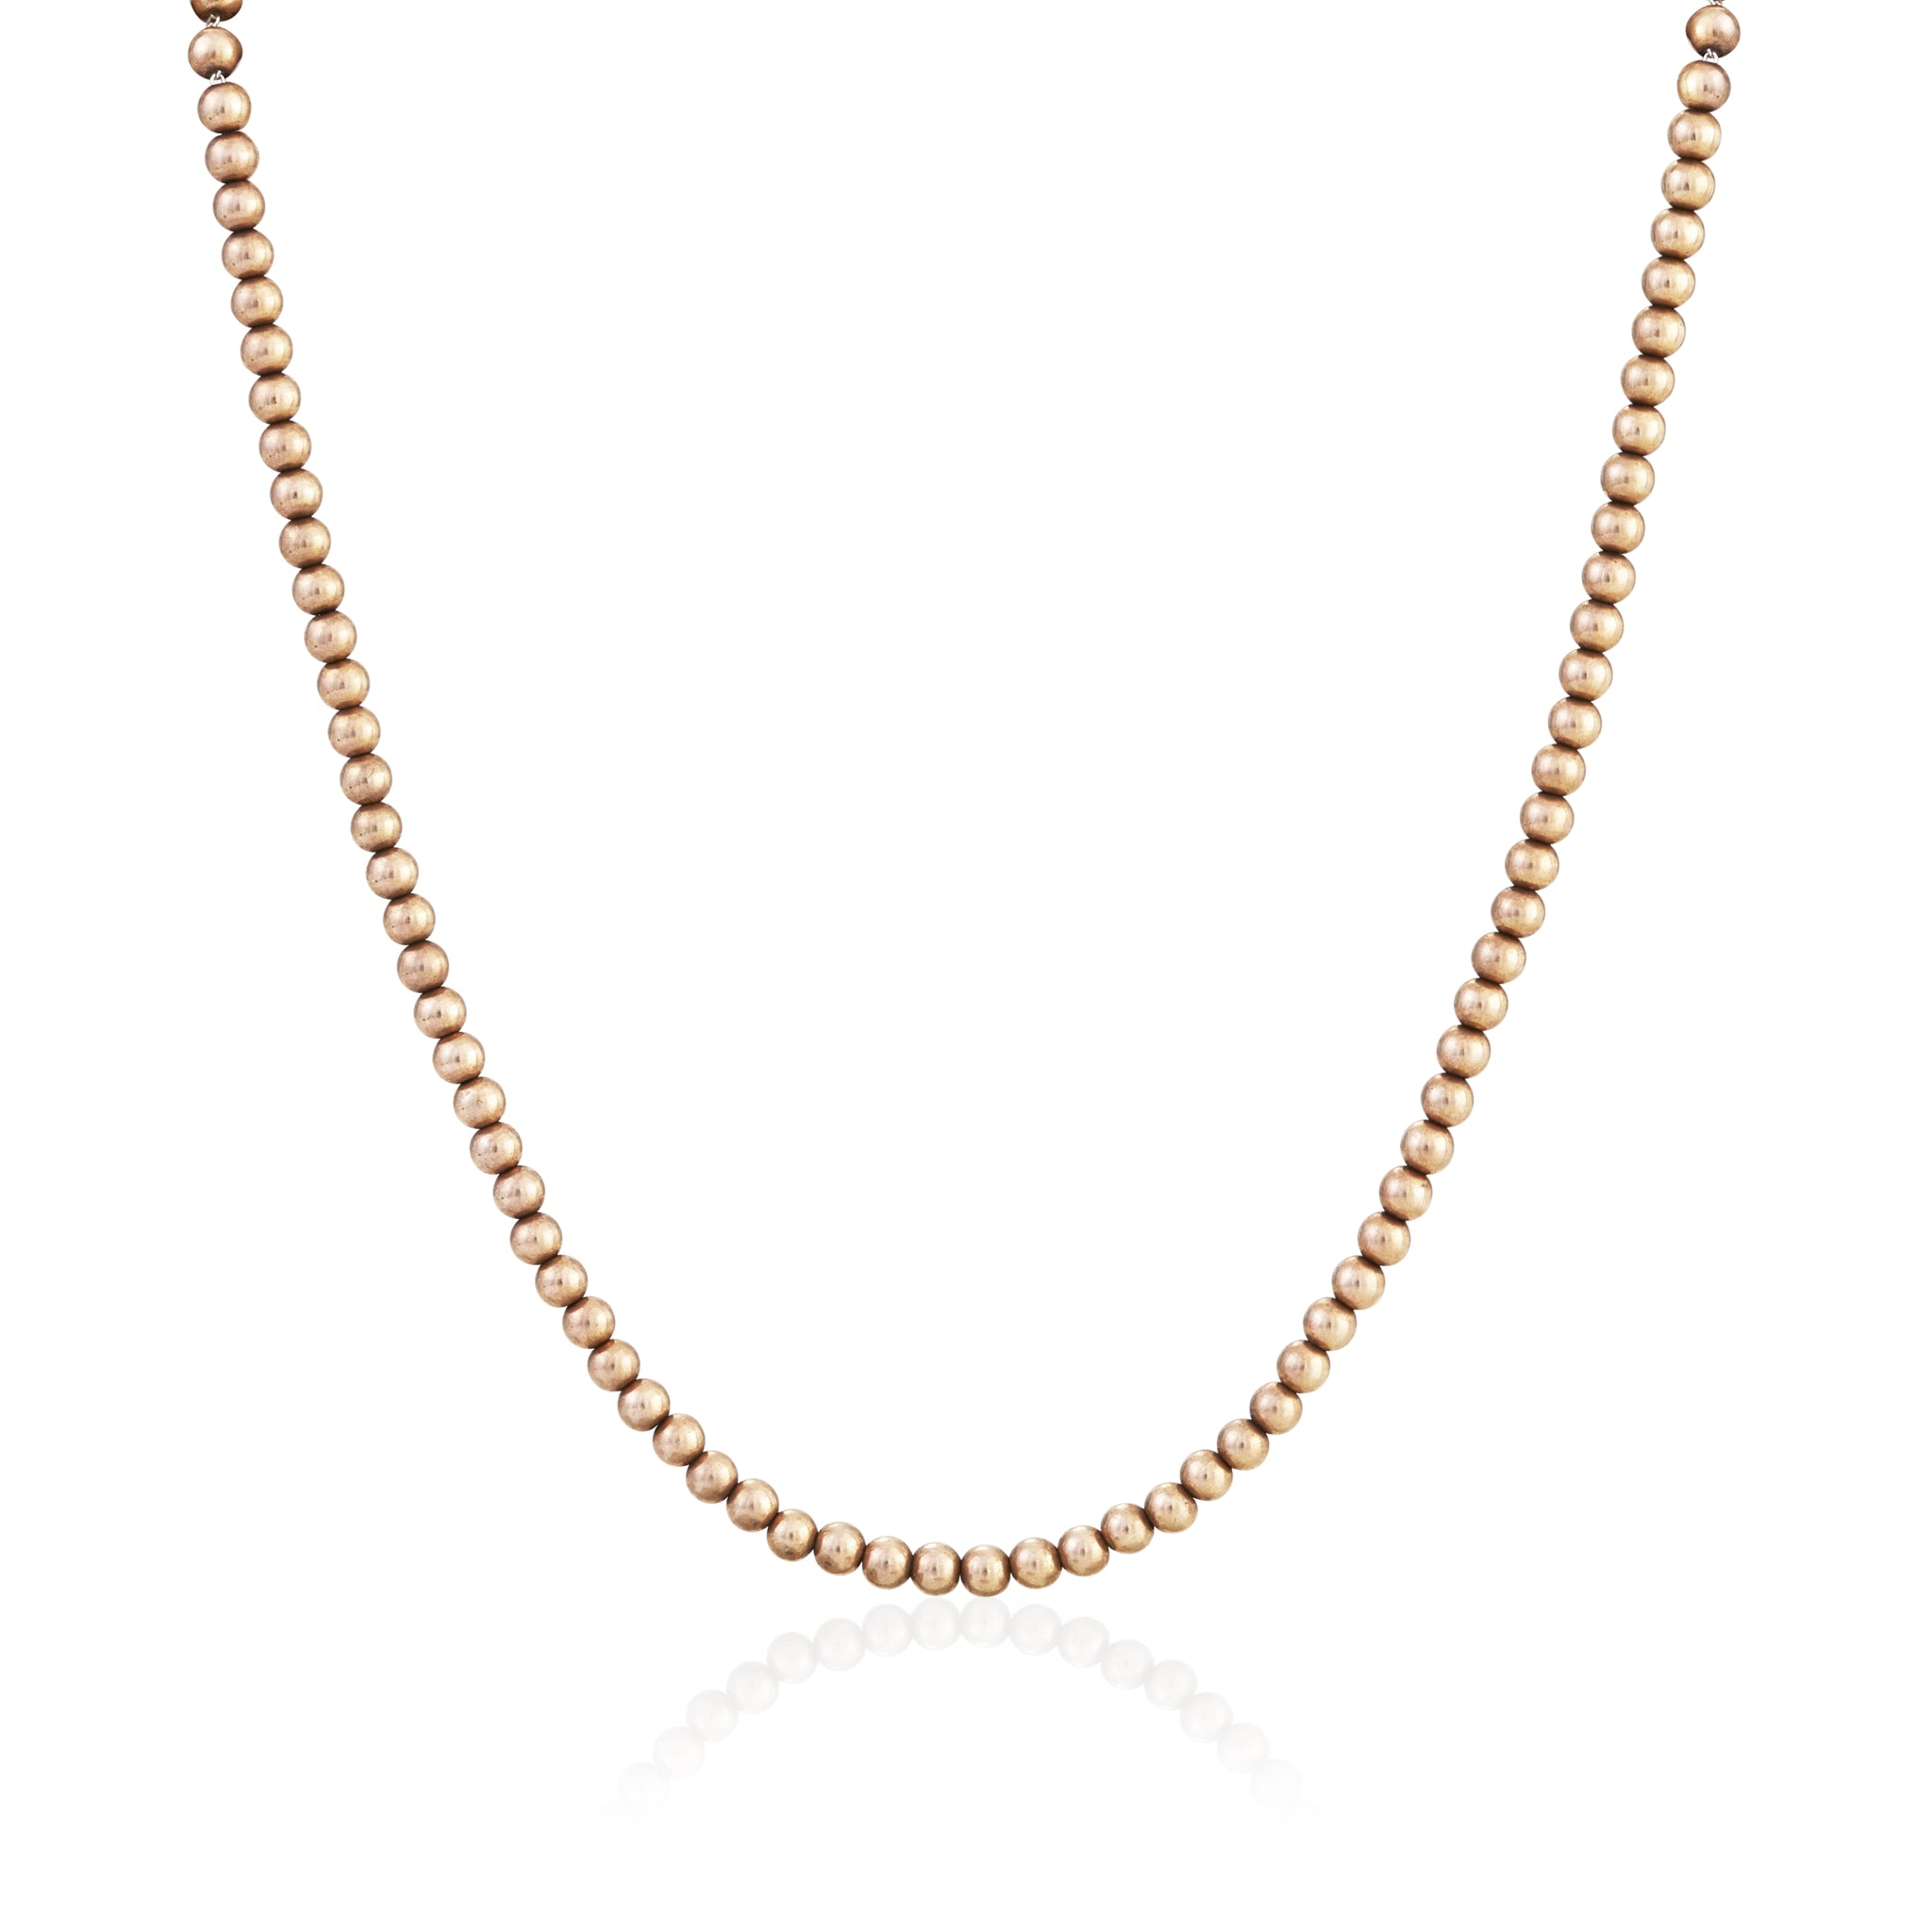 18ct gold bead necklace